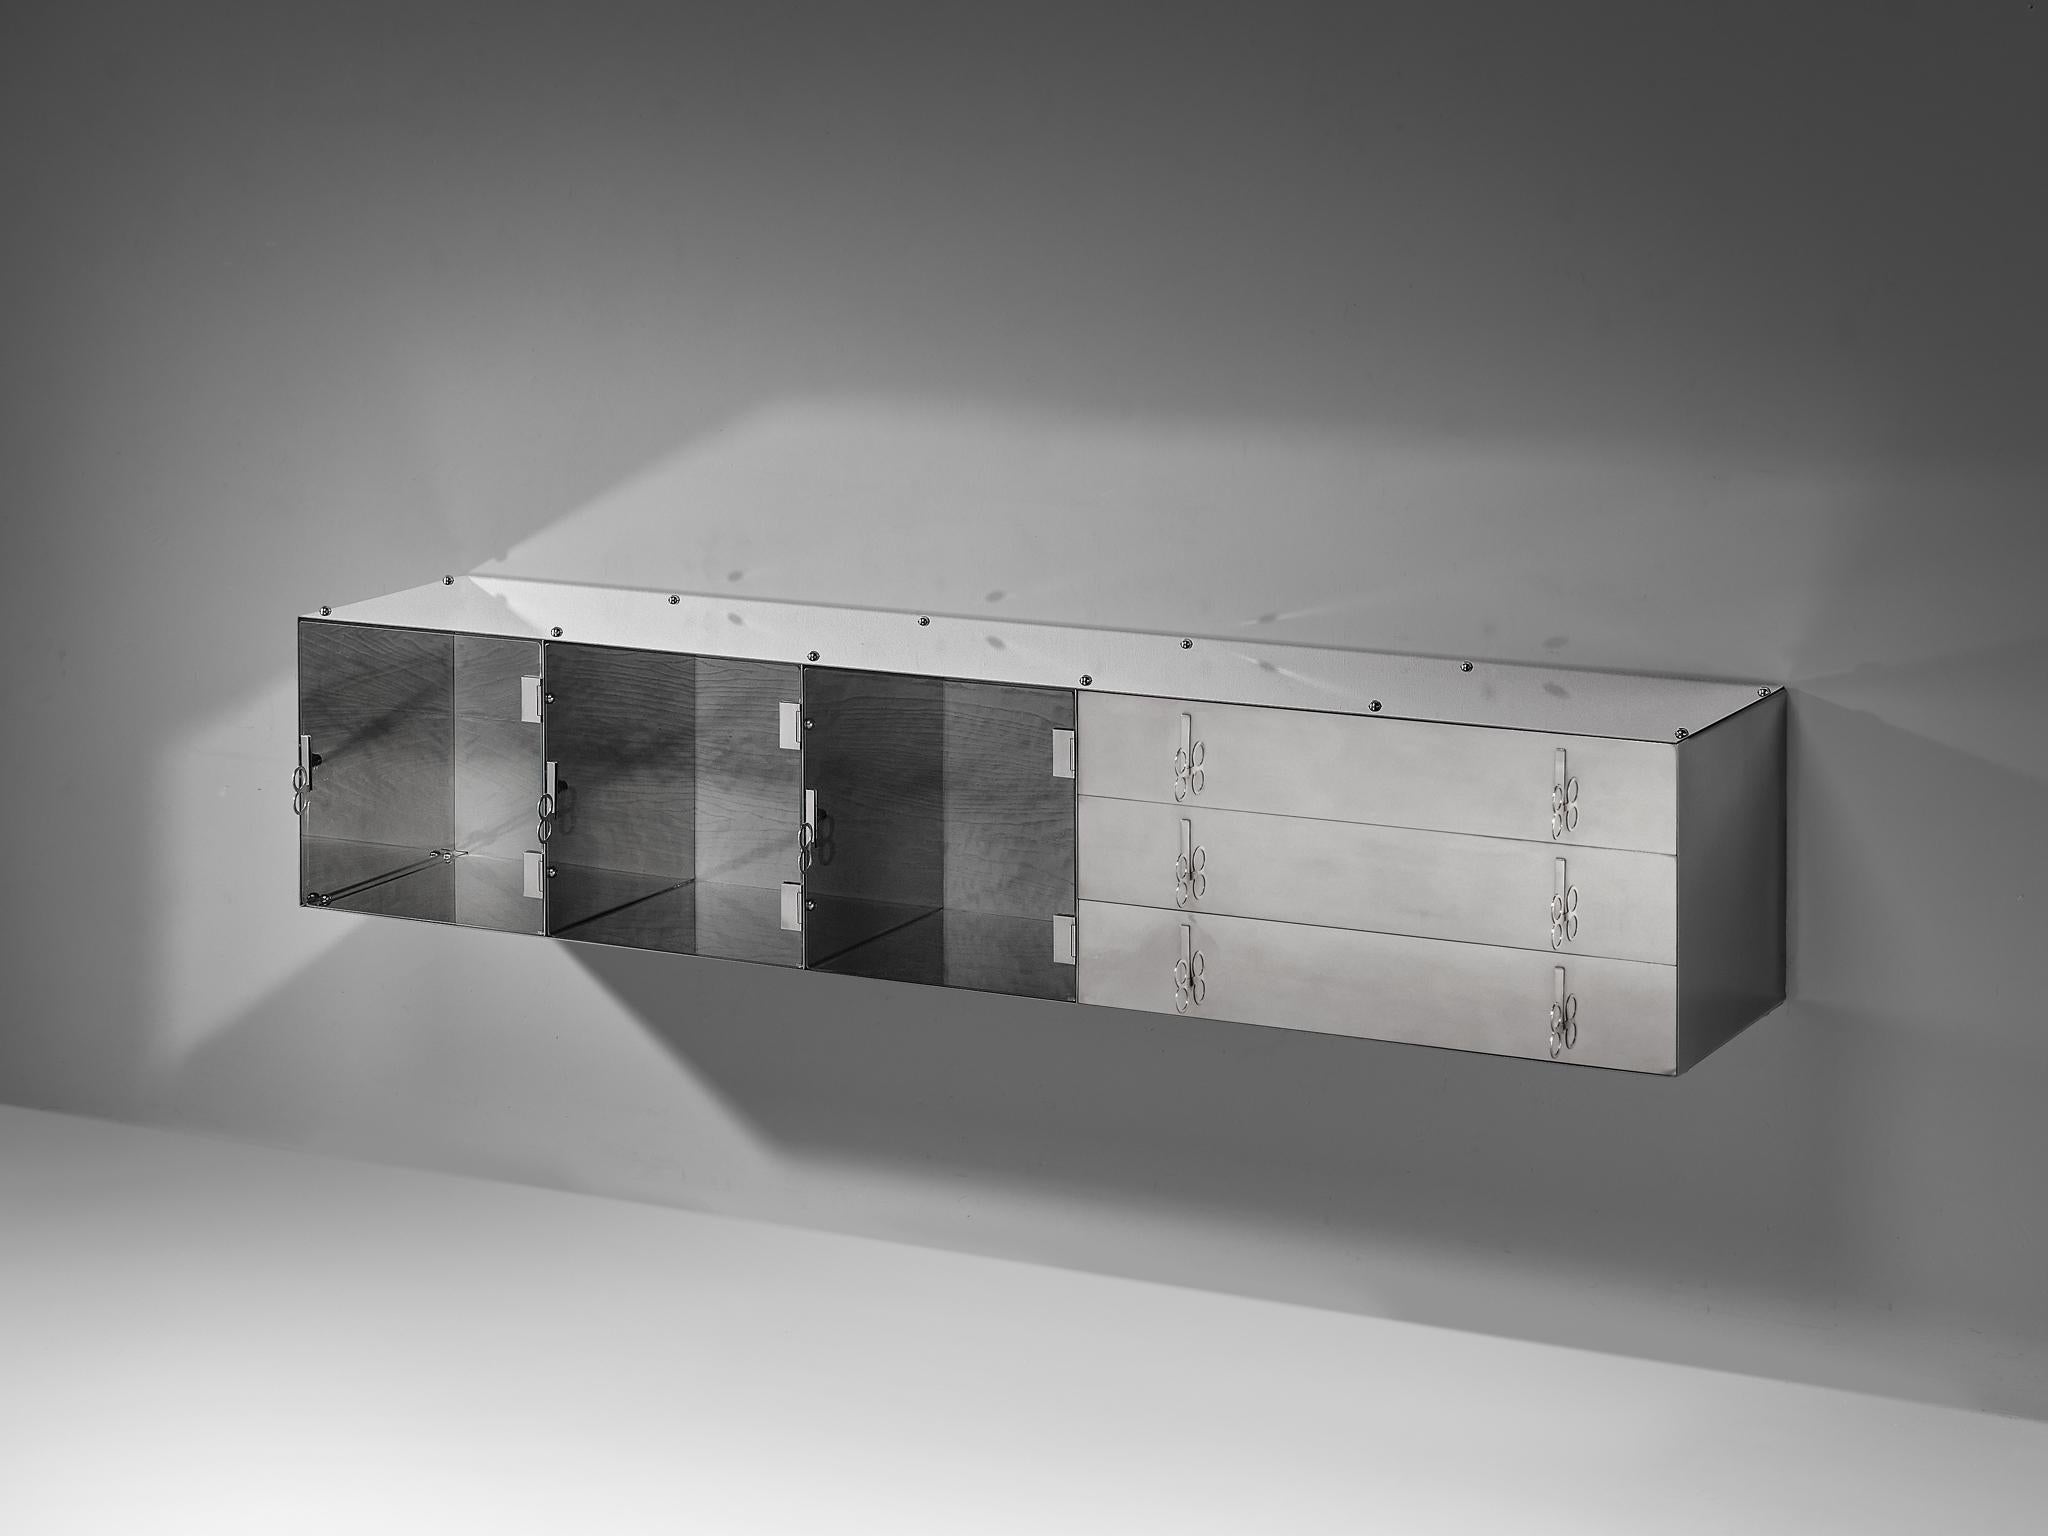 Vittorio Introini for Saporiti, wall-mounted sideboard, aluminum, glass, Italy, 1960s 

Exceptional sideboard designed by Vittorio Introini for Saporiti in the 1960s. The rationalist aluminum and glass sideboard has a clear and functionalist design